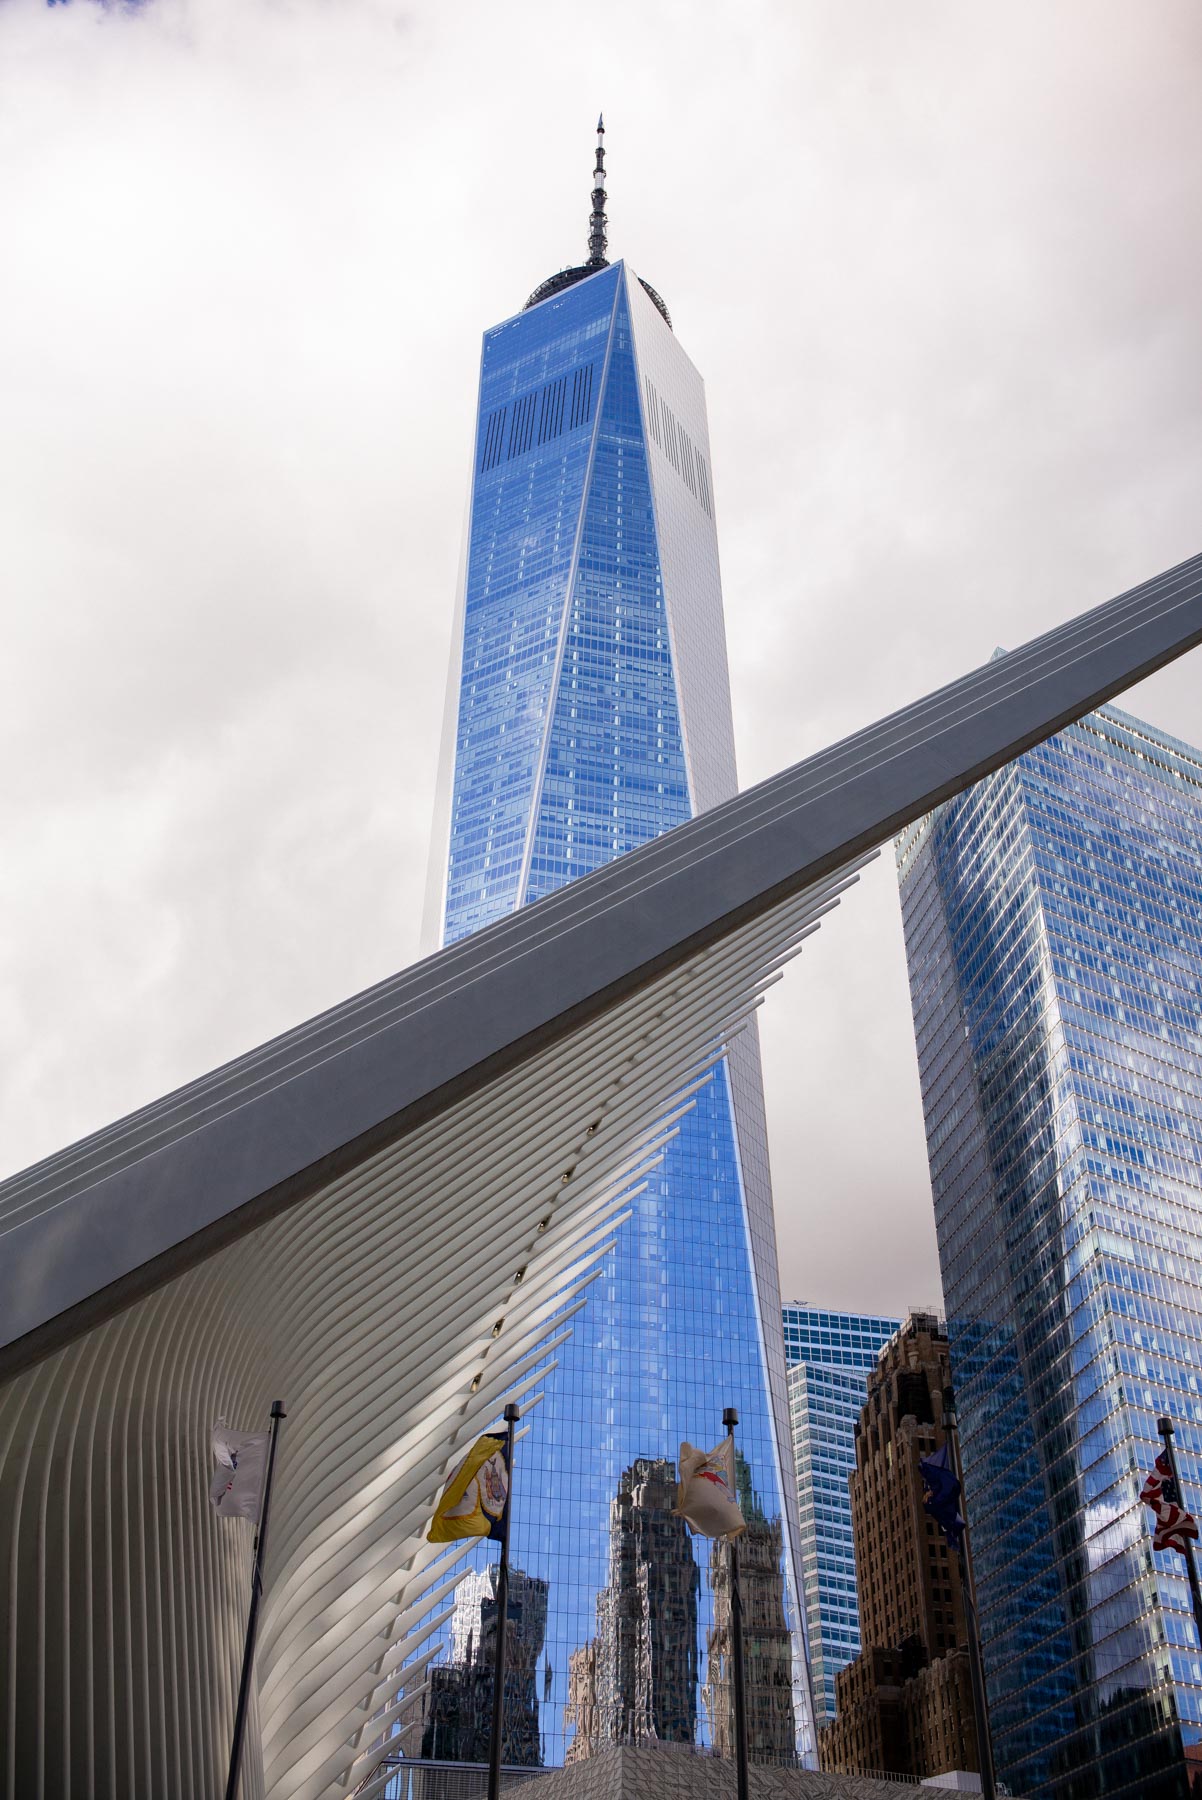 The One World Trade Center in the Financial District